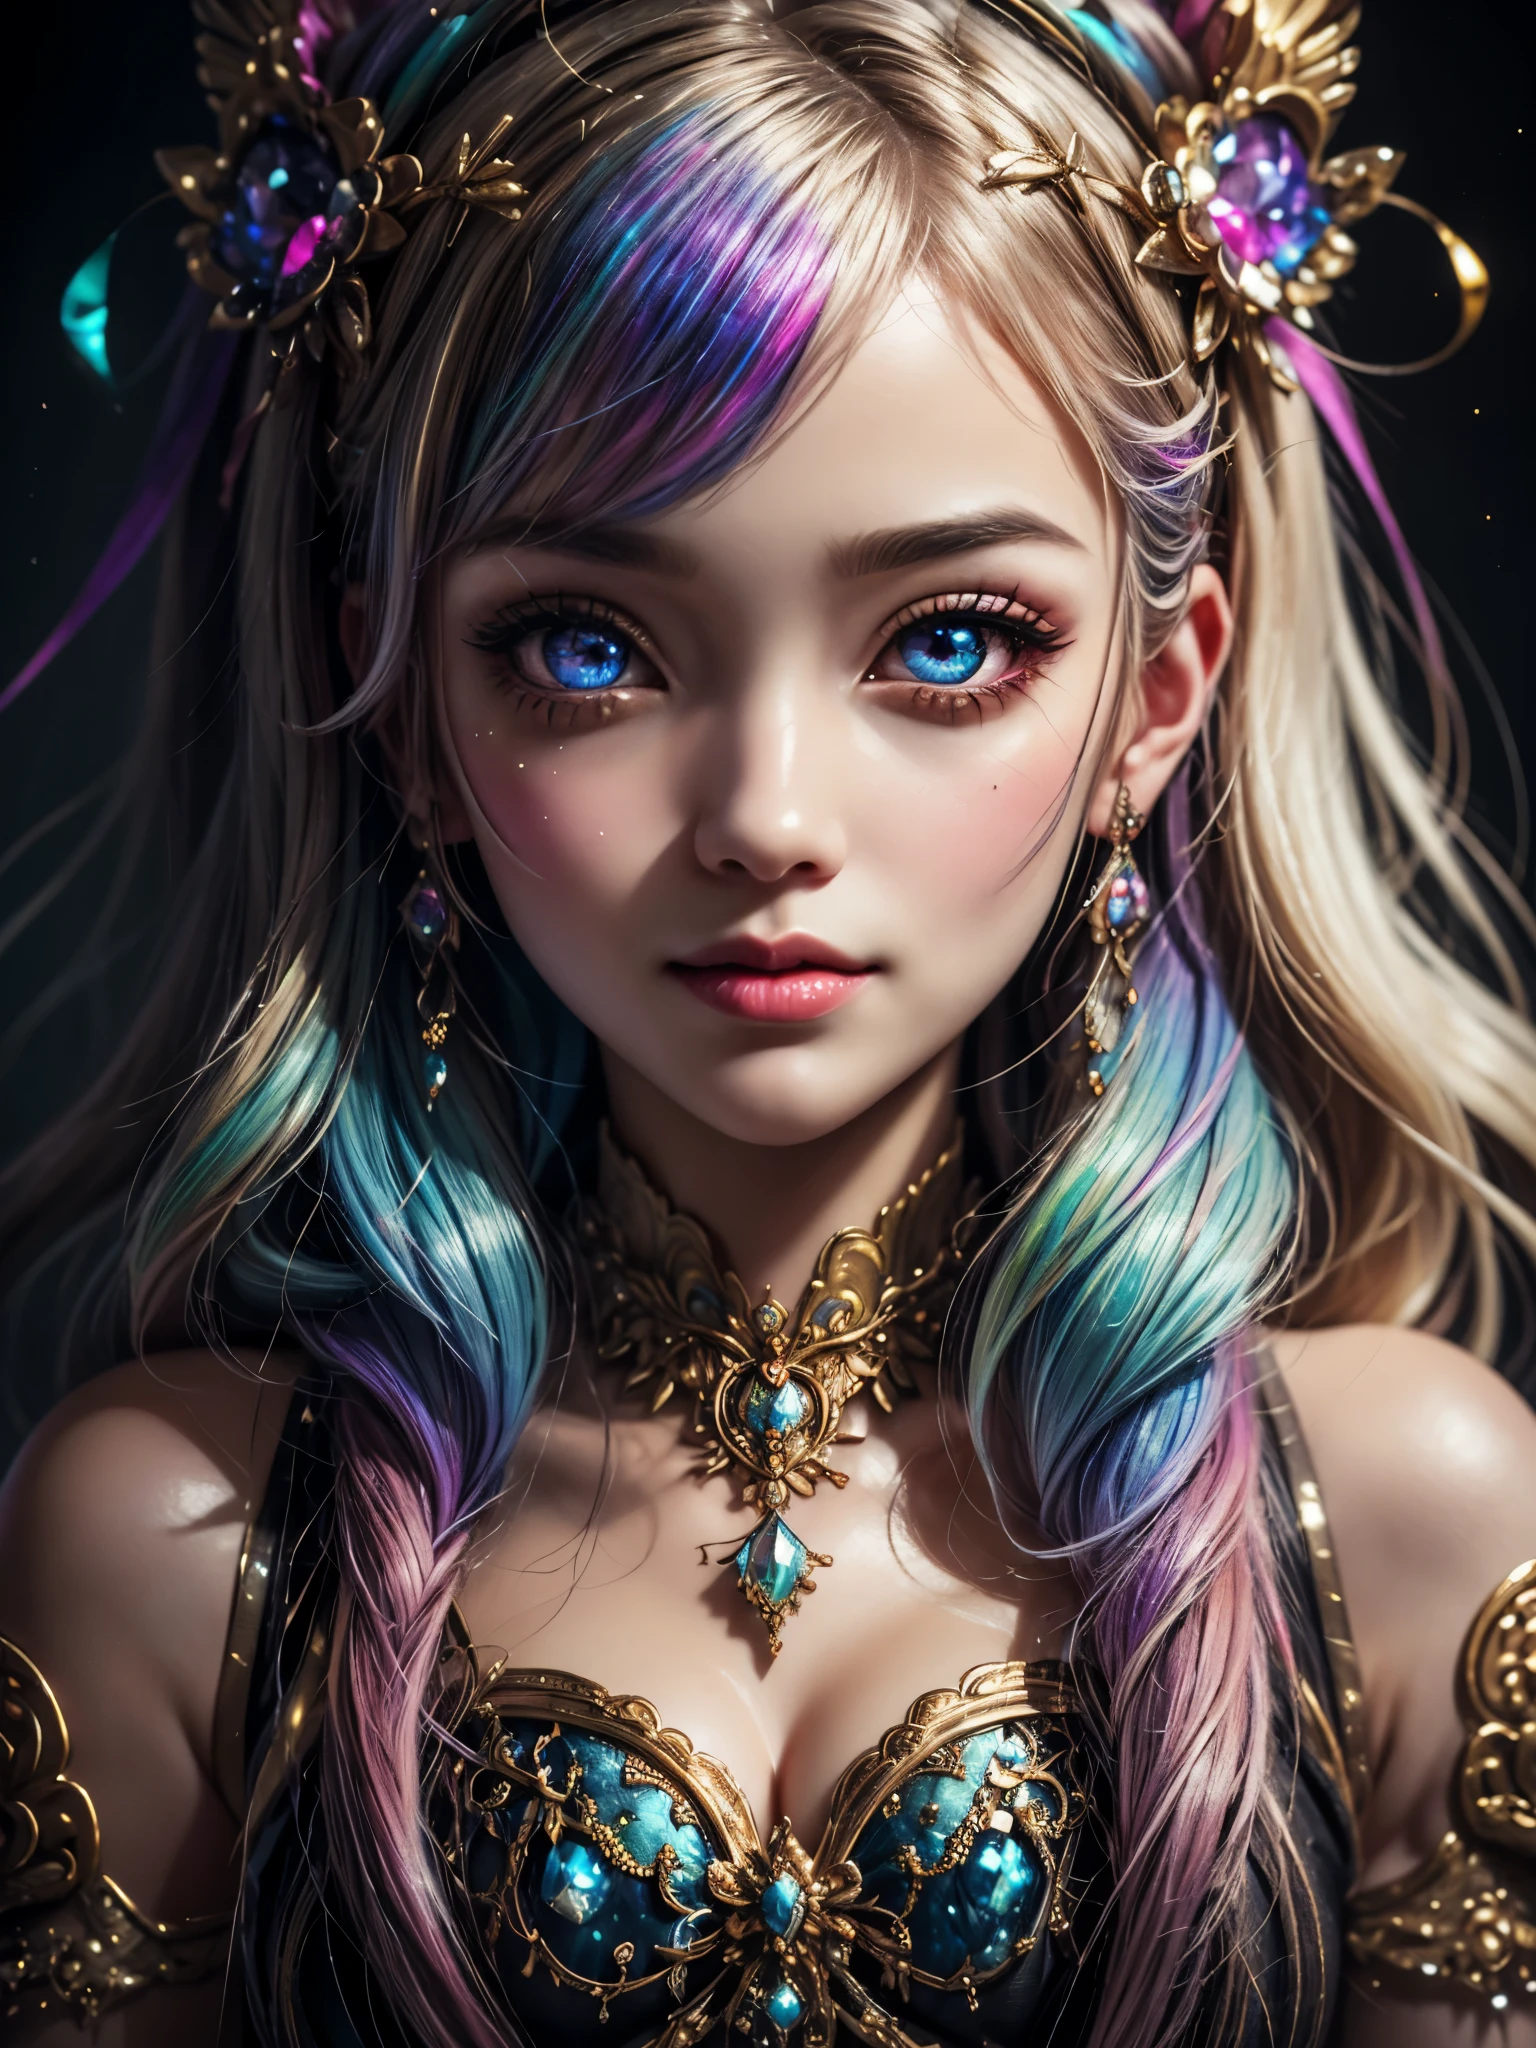 this artwork should be colorful and evoke feelings of euphoria and ecstasy. generate a beautiful fantasy woman with an interesting and dynamic manic expression. the woman is dressed in the style of harajuku decora fashion. there are many intricate and highly detailed decora fashion accents. clothing is ornate and extravagant with contrasting colors, textures, and patterns. include strong influences from lisa frank. include many awe-inspiring fantasy elements. ((include phantasmal iridescence, crystals, bumps, and rainbow colors that drip like paint through the artwork.)) rainbow paint should drip through hair and onto face and body. pay particular attention to a beautifully detailed face with realistic shading. include 8k eyes, highly detailed eyes, realistically detailed eyes, (((macro eyes))), bright eyes. the overall feeling of this artwork should be happiness and excitement. the artwork should be highly ornate. impress me. the artwork should be highly creative and ultra ornate. include many decora decorations and accessories. (fantasy00d), high quality, highres, detail enhancement